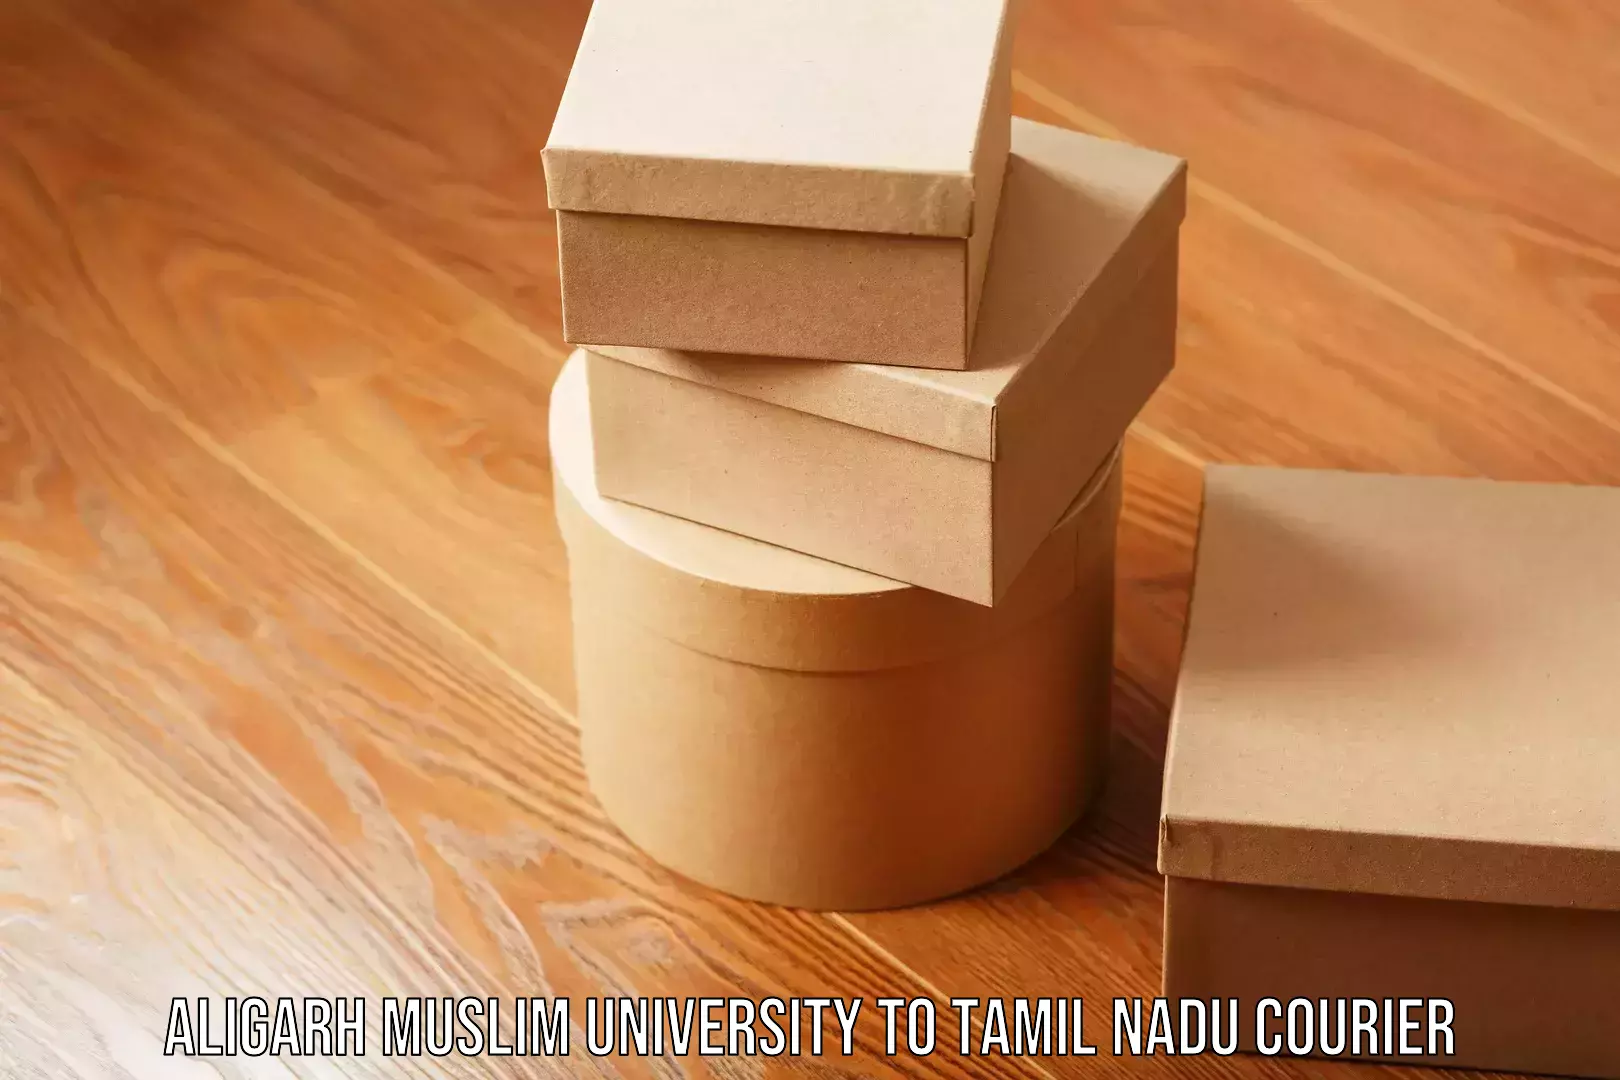 Subscription-based courier Aligarh Muslim University to Tamil Nadu